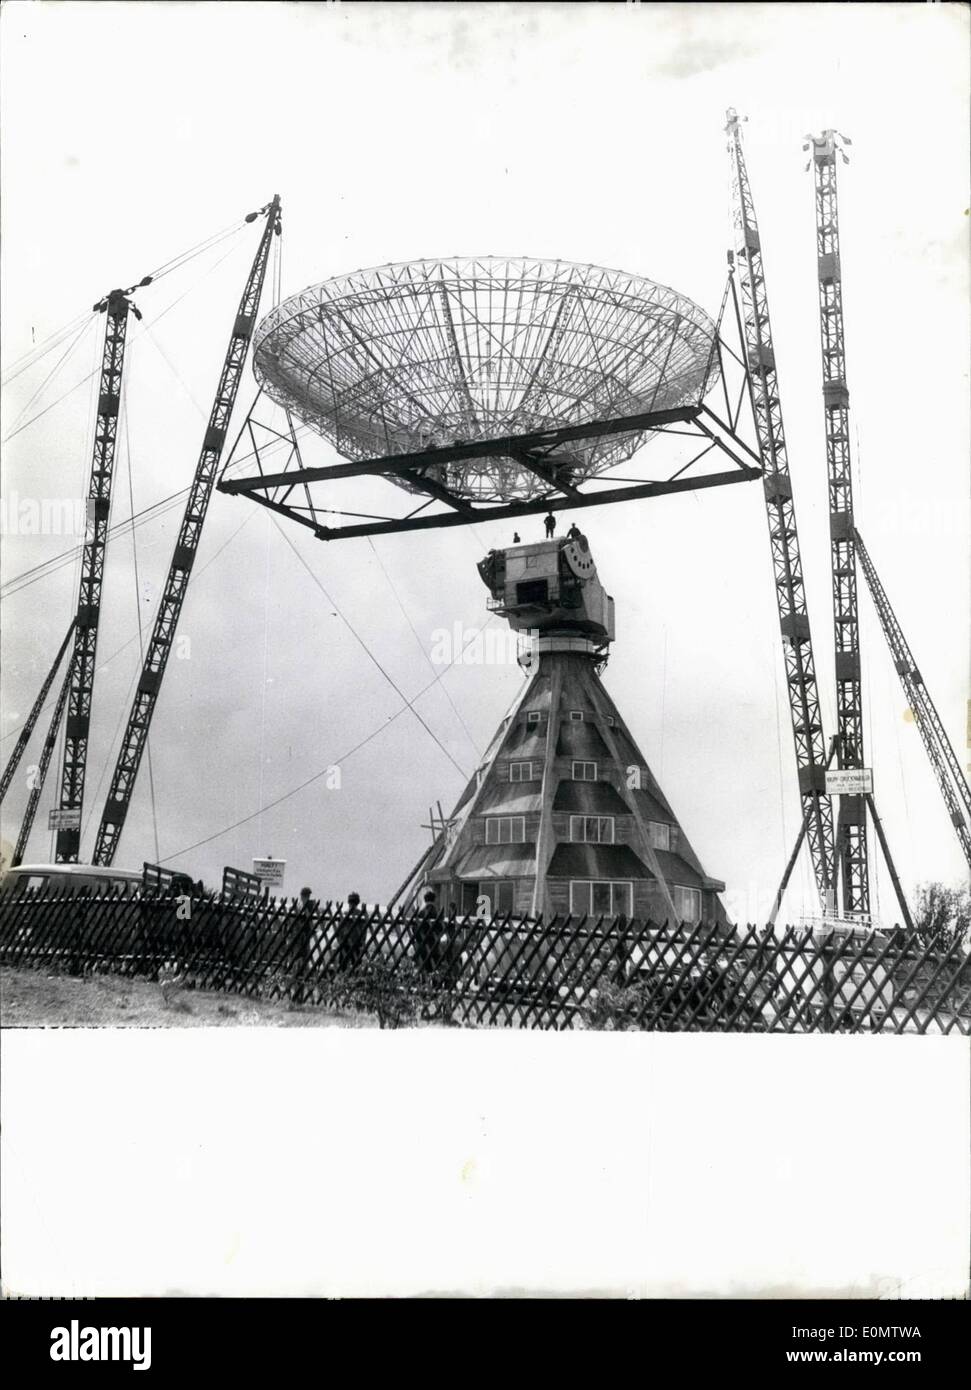 Sep. 09, 1956 - Twenty five meter concave mirror - German Radio telescope at Munstereifel: The huge 25 meter Concave Mirror of the first German Radio telescope was mounted recently in Munstereifel by engineers who carried out the heavy task in spite of stormy weather. Photo shows the scene as the huge mirror is hoisted in Munstereifel. Stock Photo